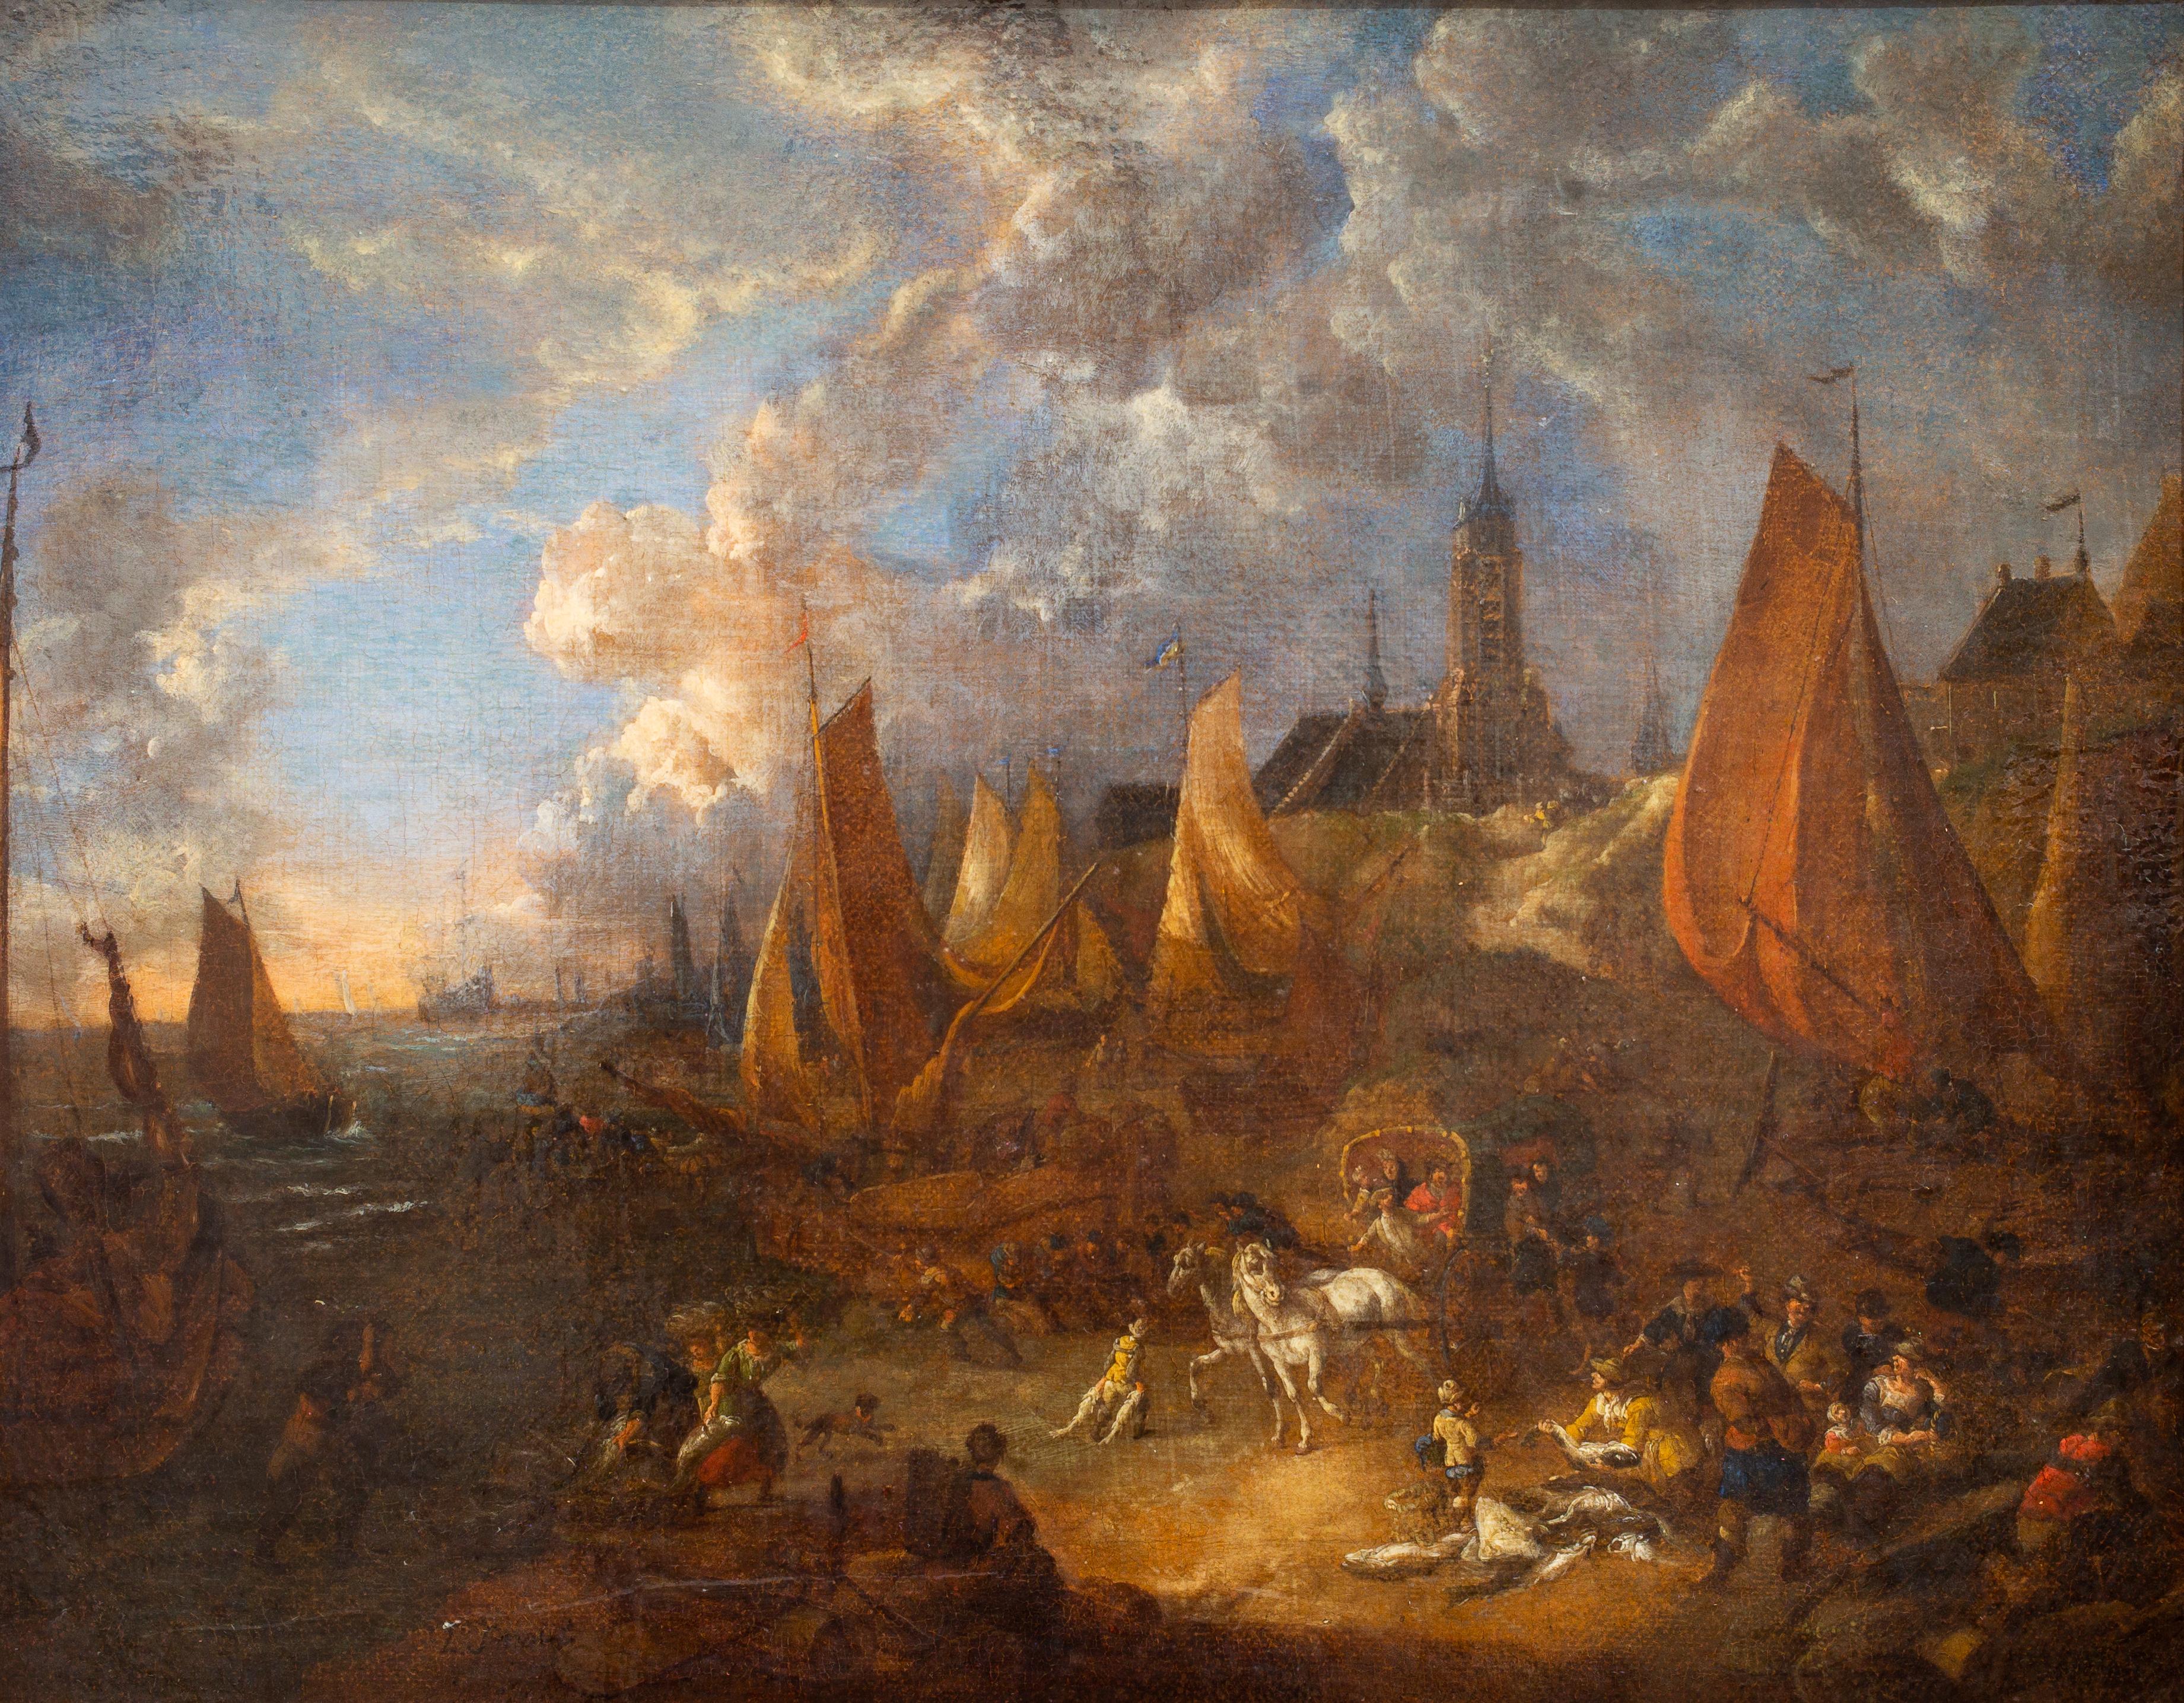 17th-cent, A Coastal Landscape With Travellers and Fishermen Selling Their Catch - Painting by Lucas Smout II